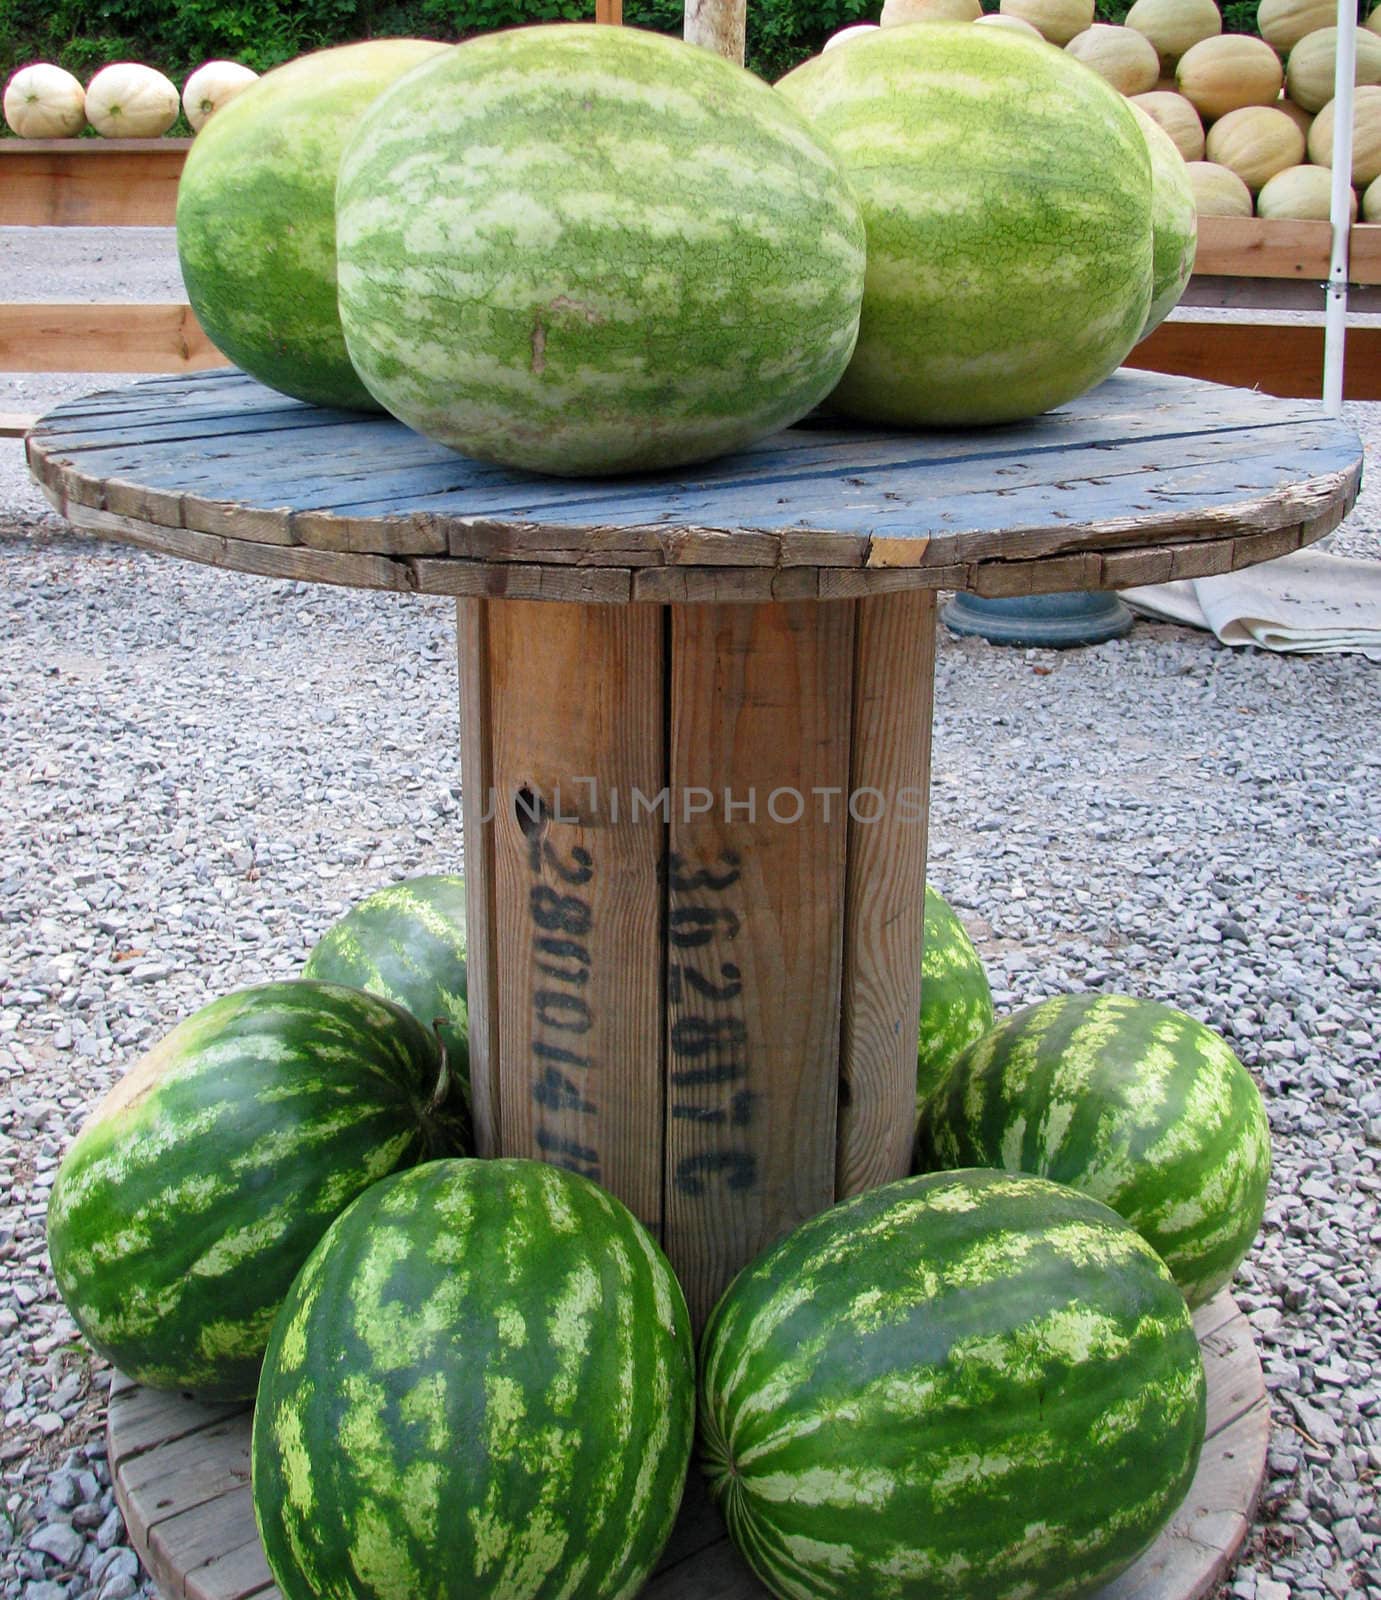 Watermelons and Cantaloupes by bellafotosolo